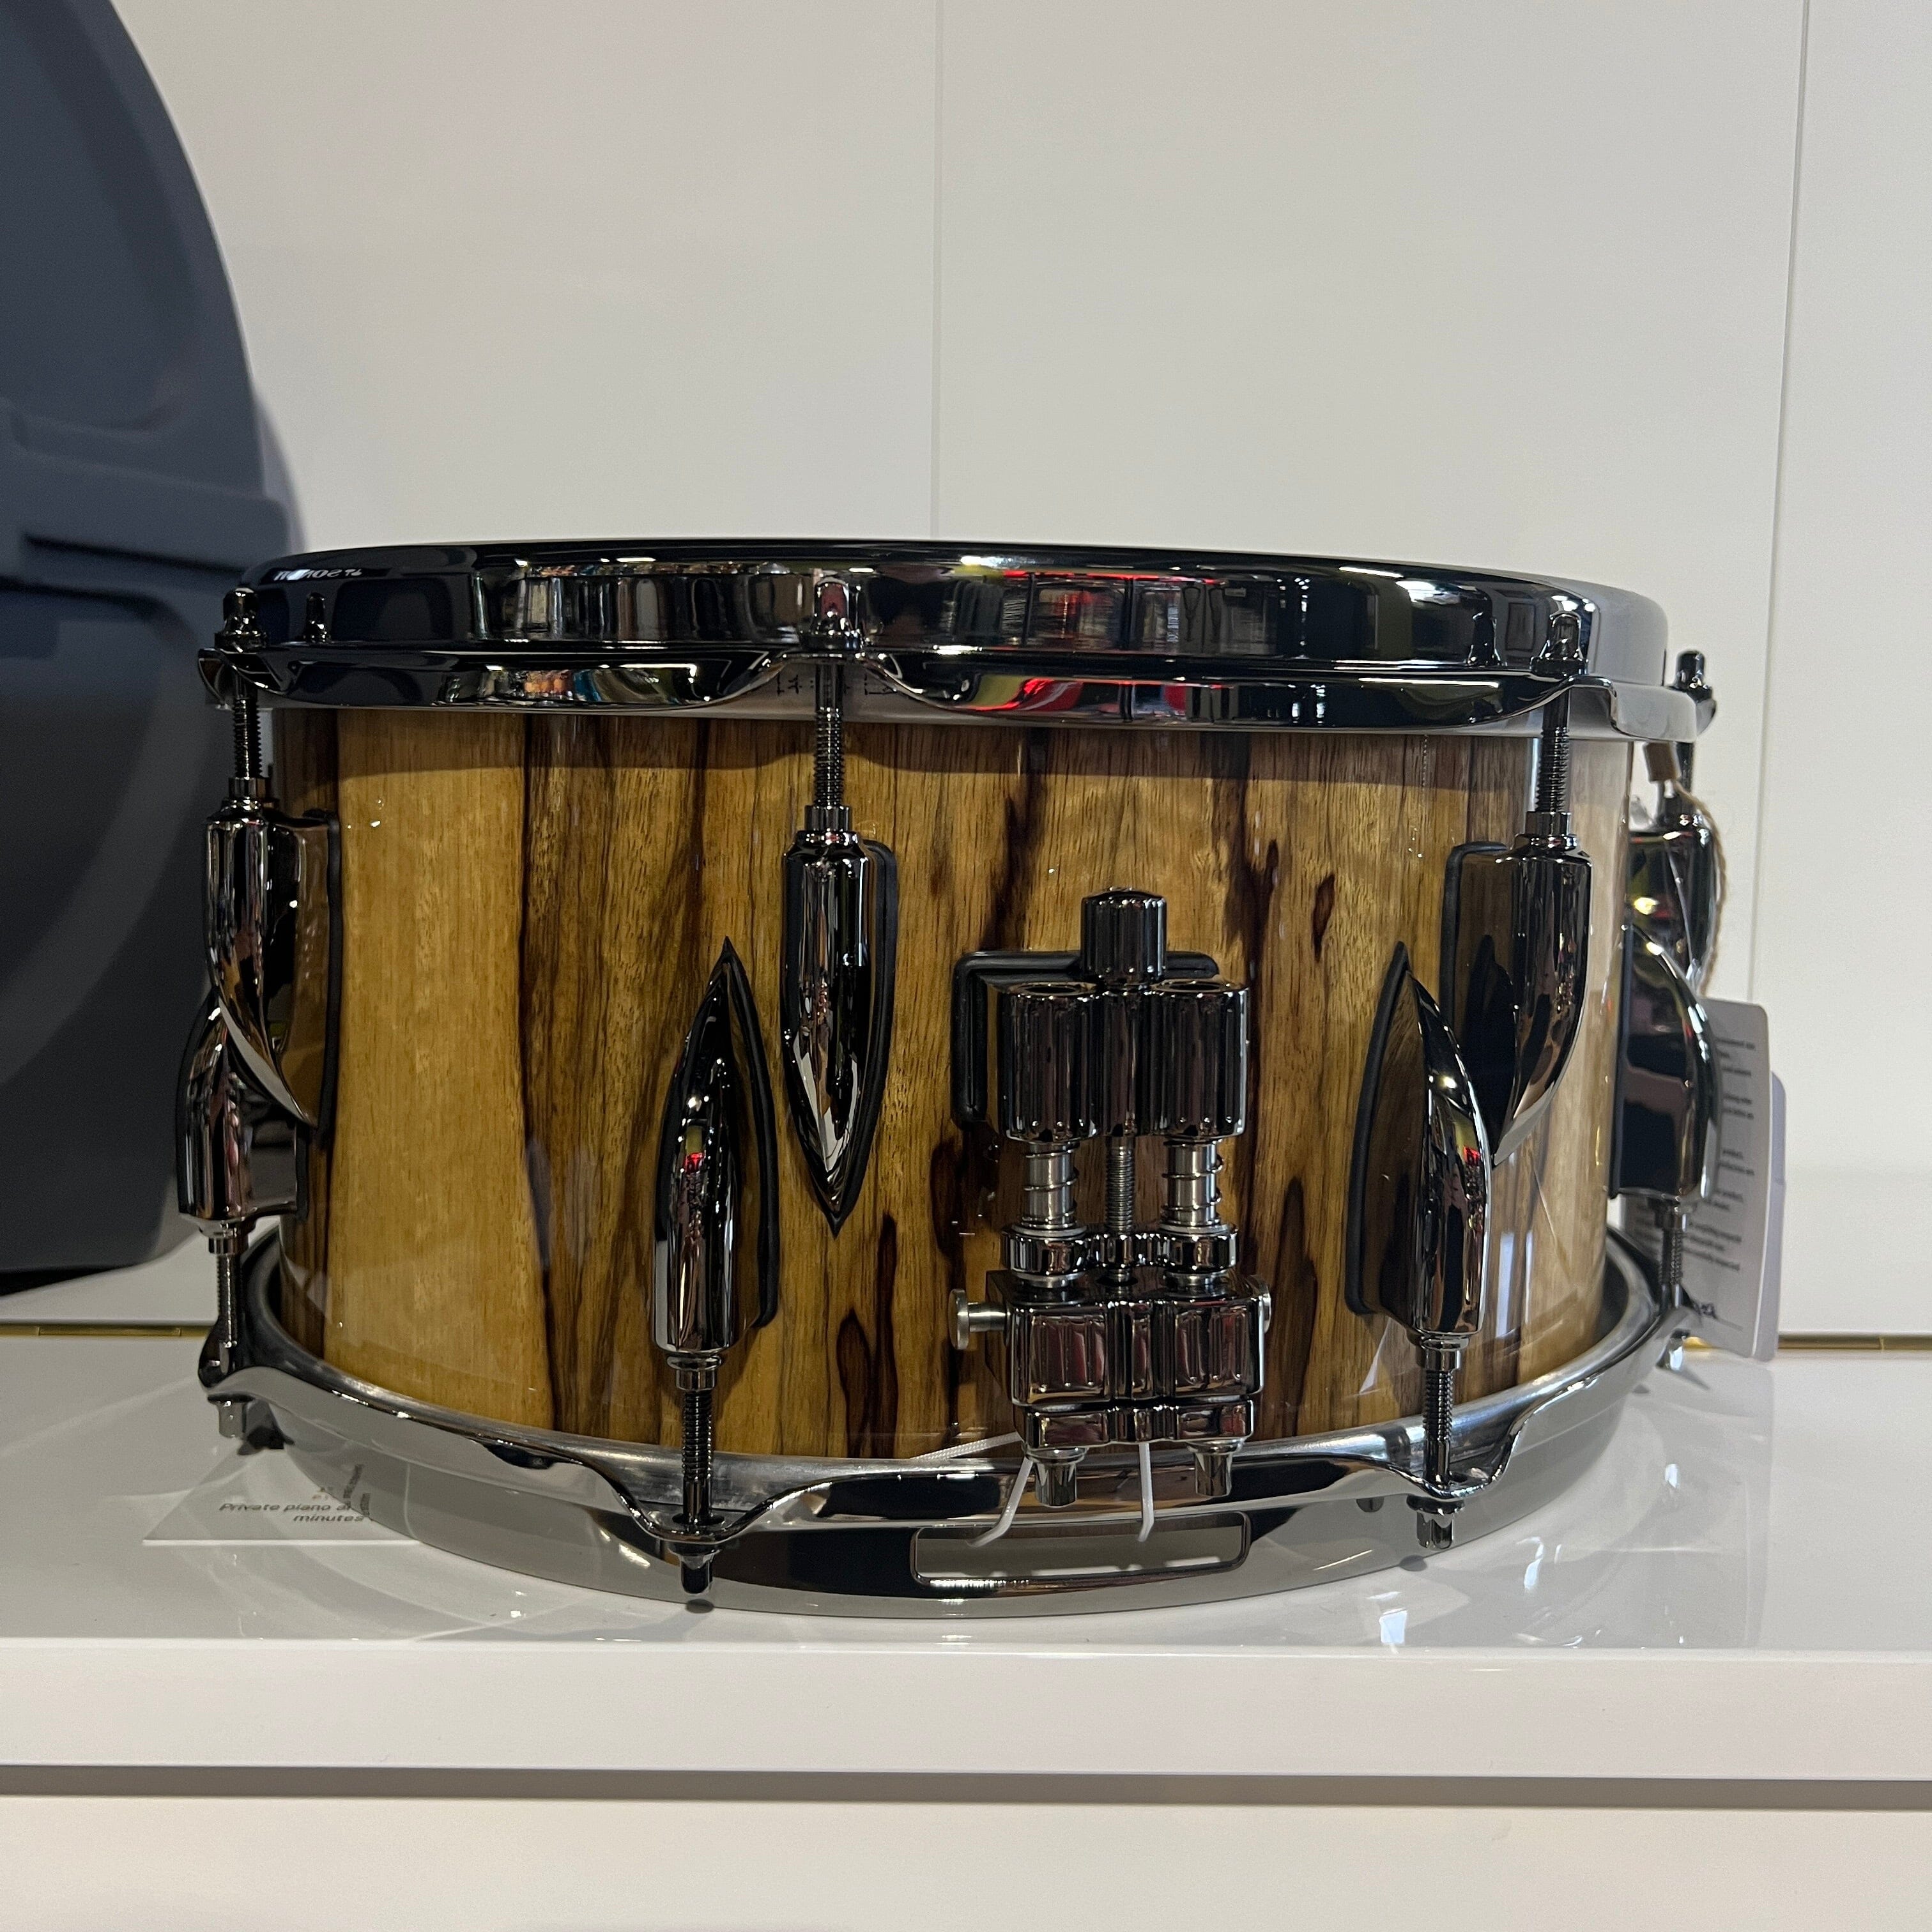 Sonor One of a Kind Black Limba snare 13 x 6.5 reverb Sonor 